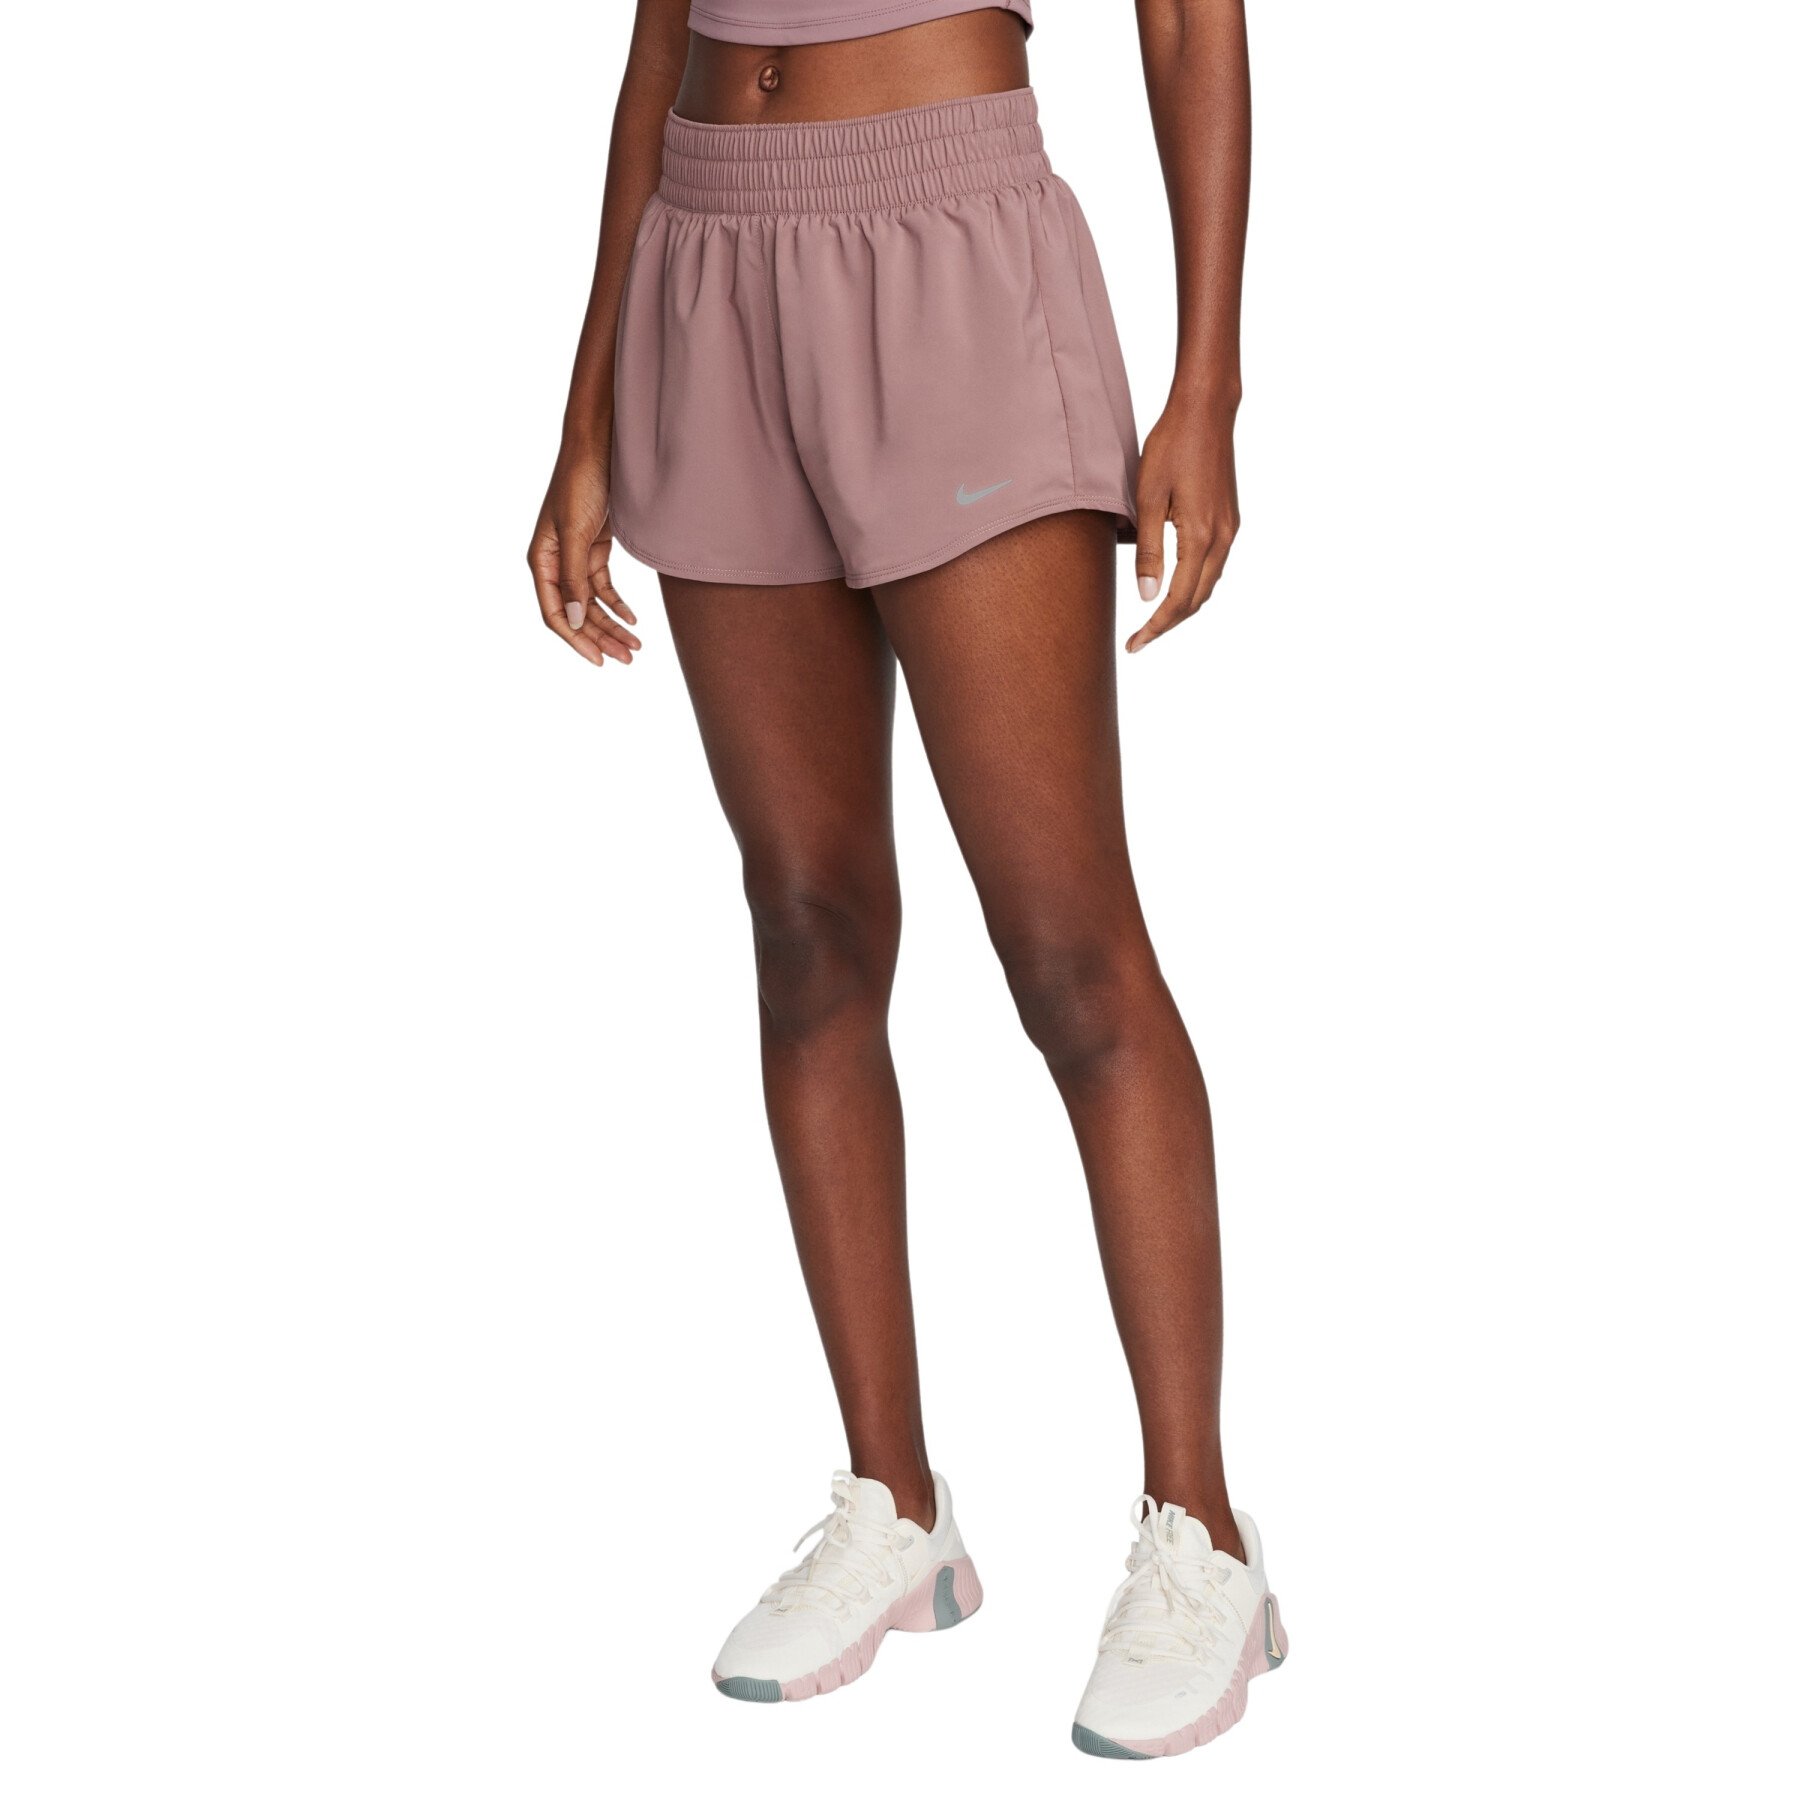 Women's mid-low waist lined shorts Nike One Dri-FIT